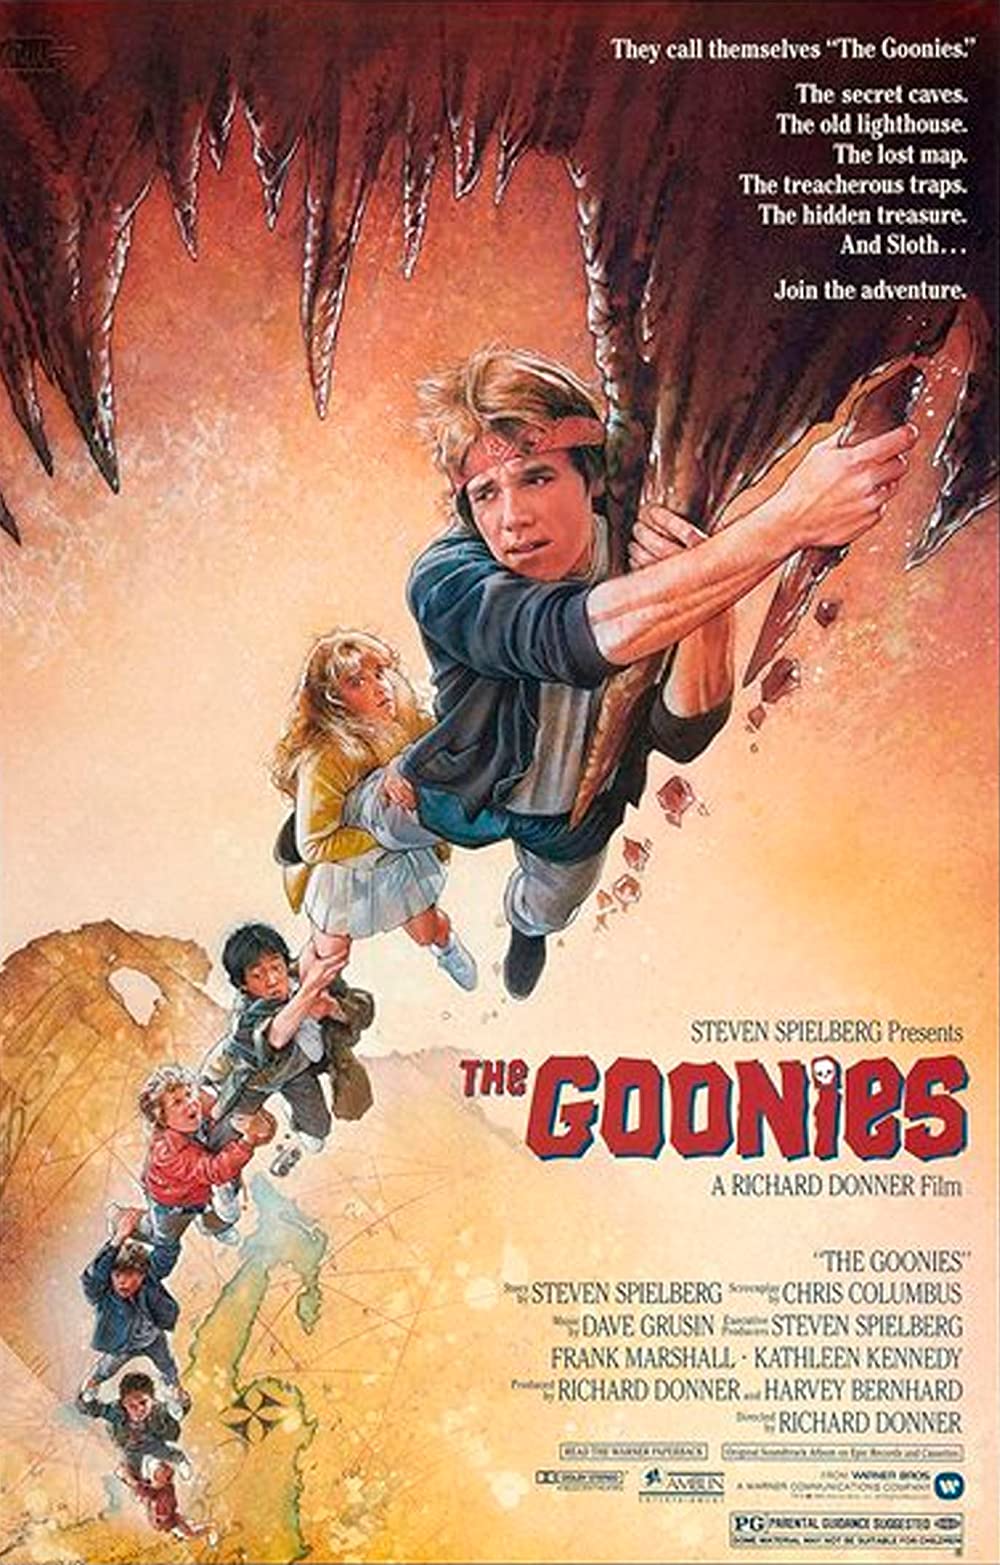 Film poster for THE GOONIES (1985)